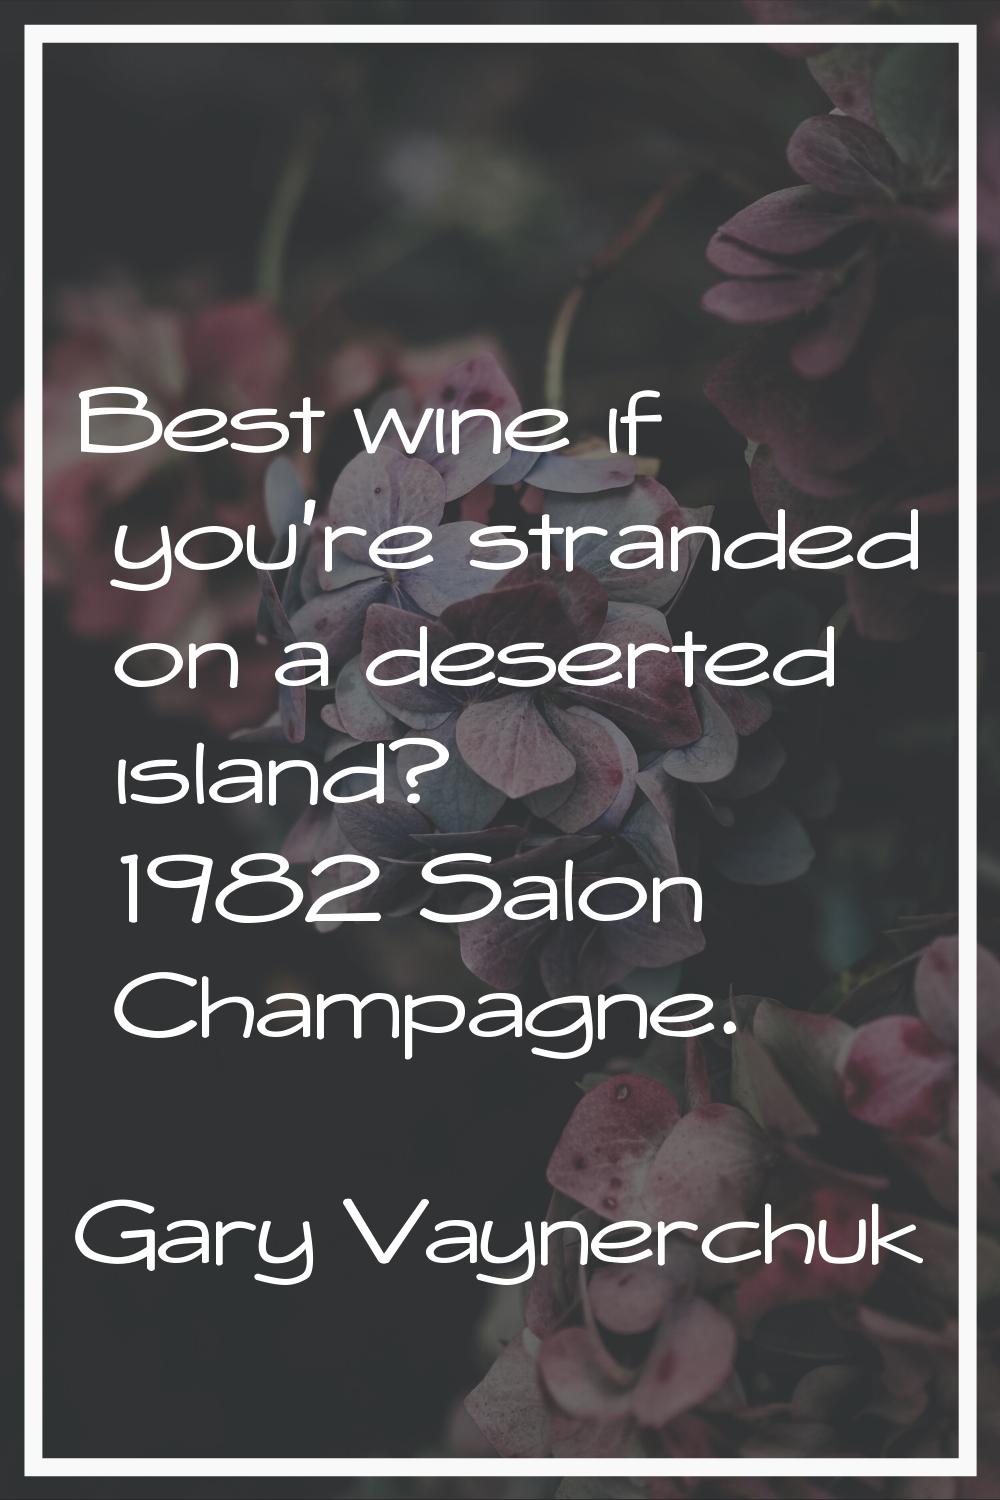 Best wine if you're stranded on a deserted island? 1982 Salon Champagne.